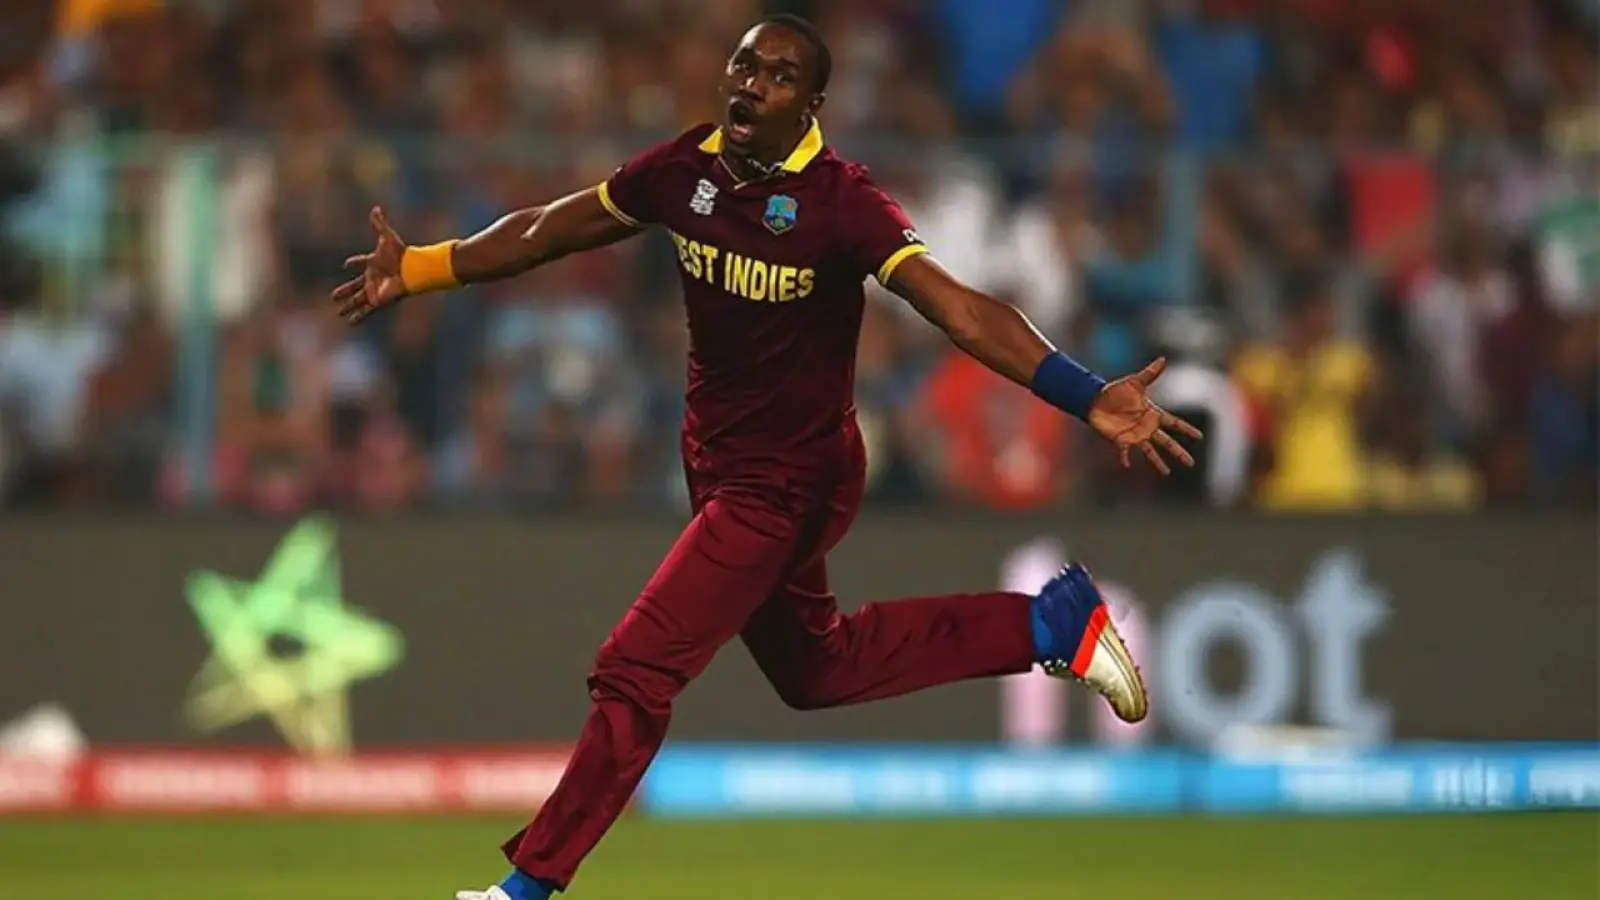 Before T20 World Cup, Afghanistan found the match winner, gave big responsibility to Dwayne Bravo